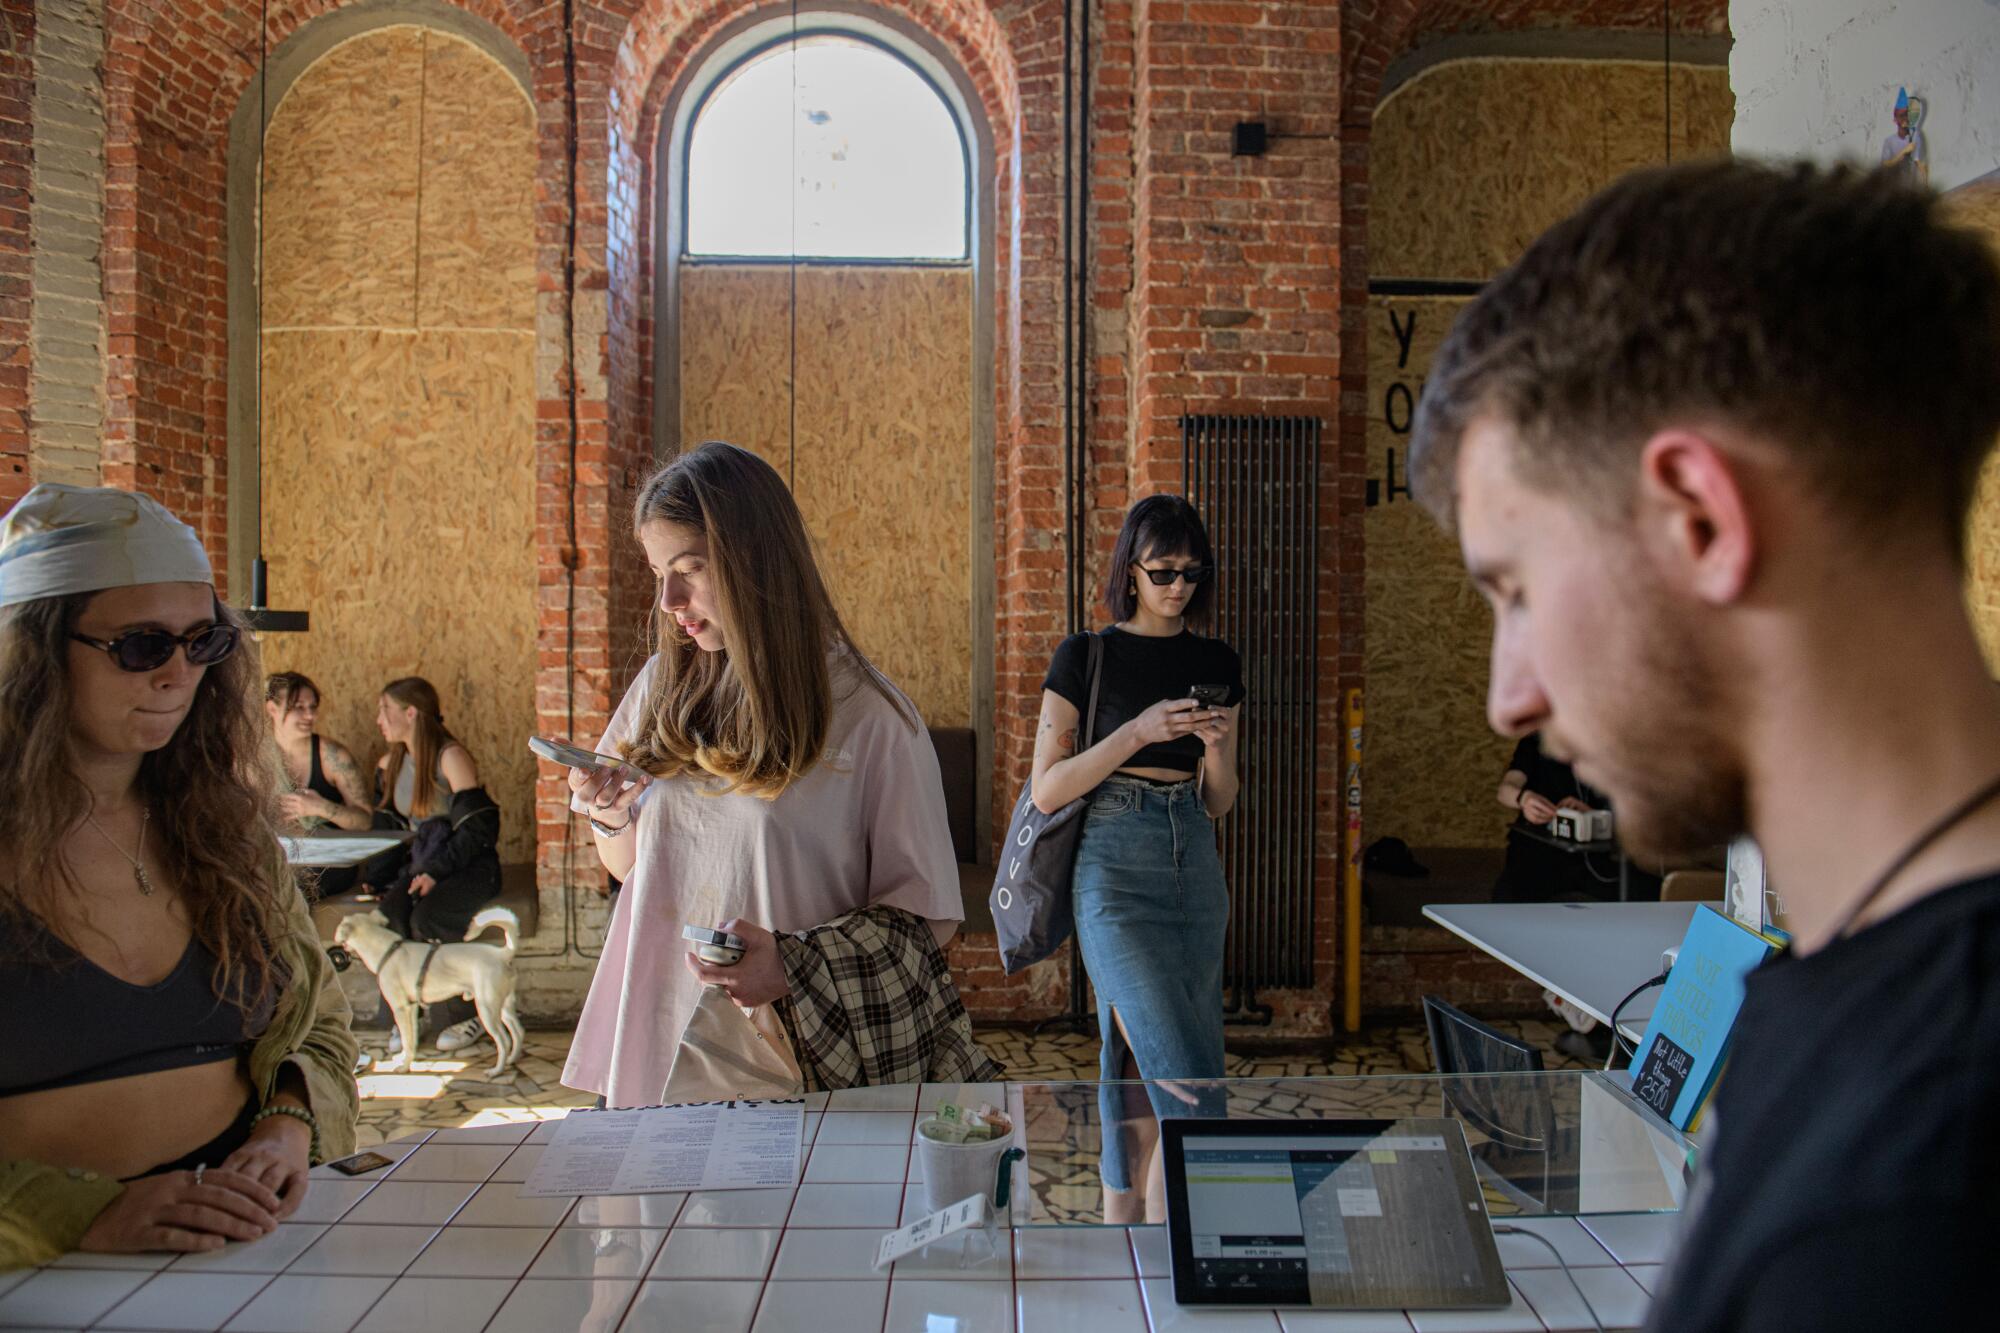 A girl looks at her phone near other people in a coffeehouse with brick walls and boarded-up windows.